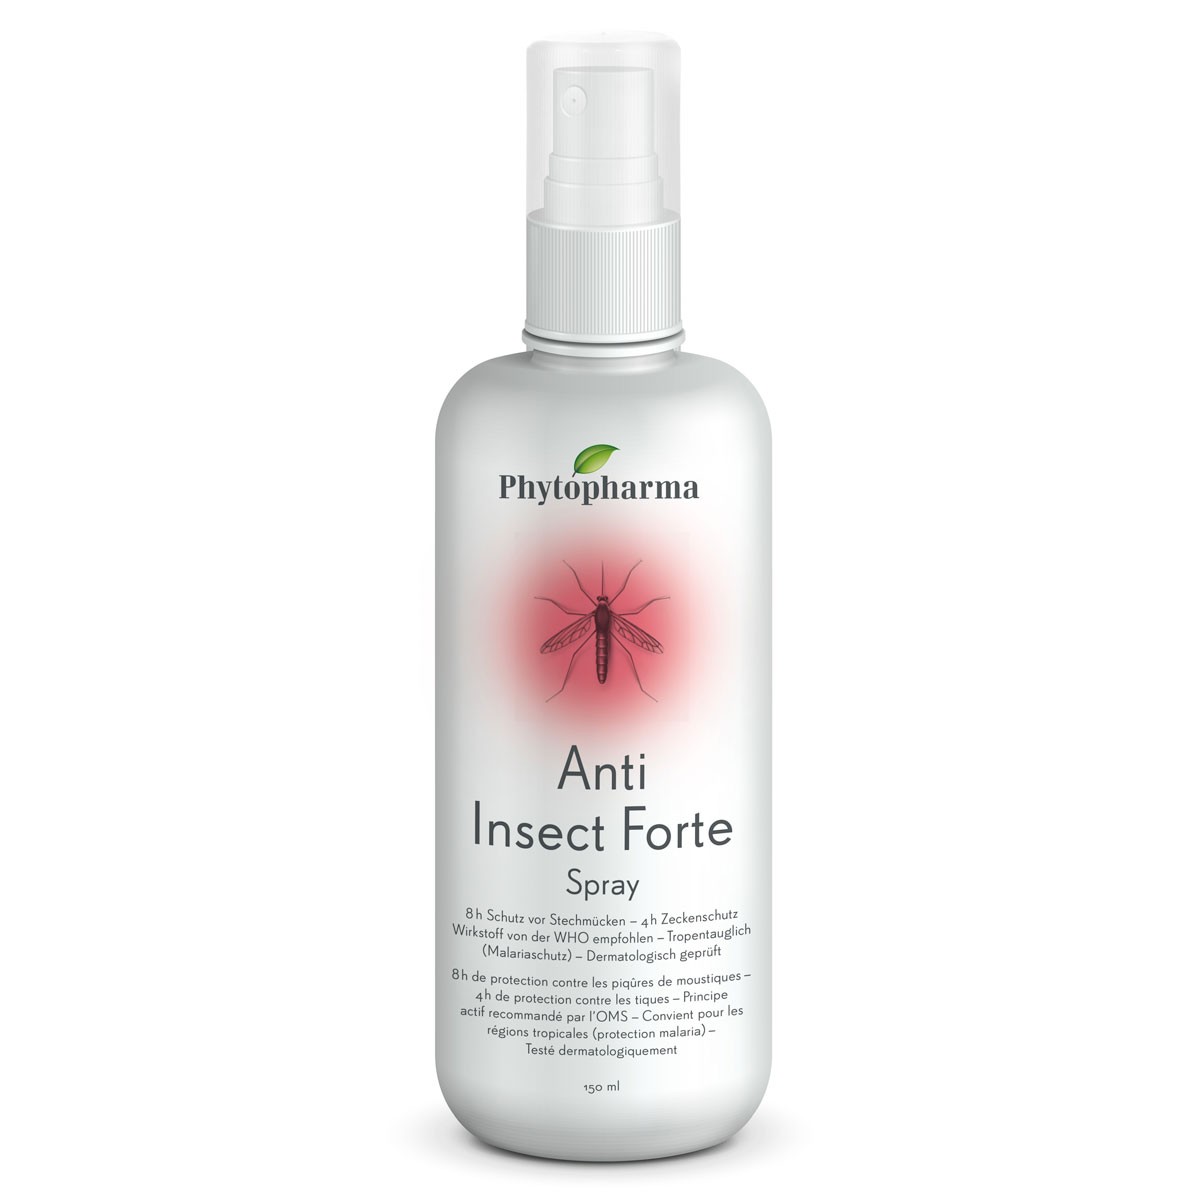 Image of Phytopharma Anti Insect Forte Spray (150ml)